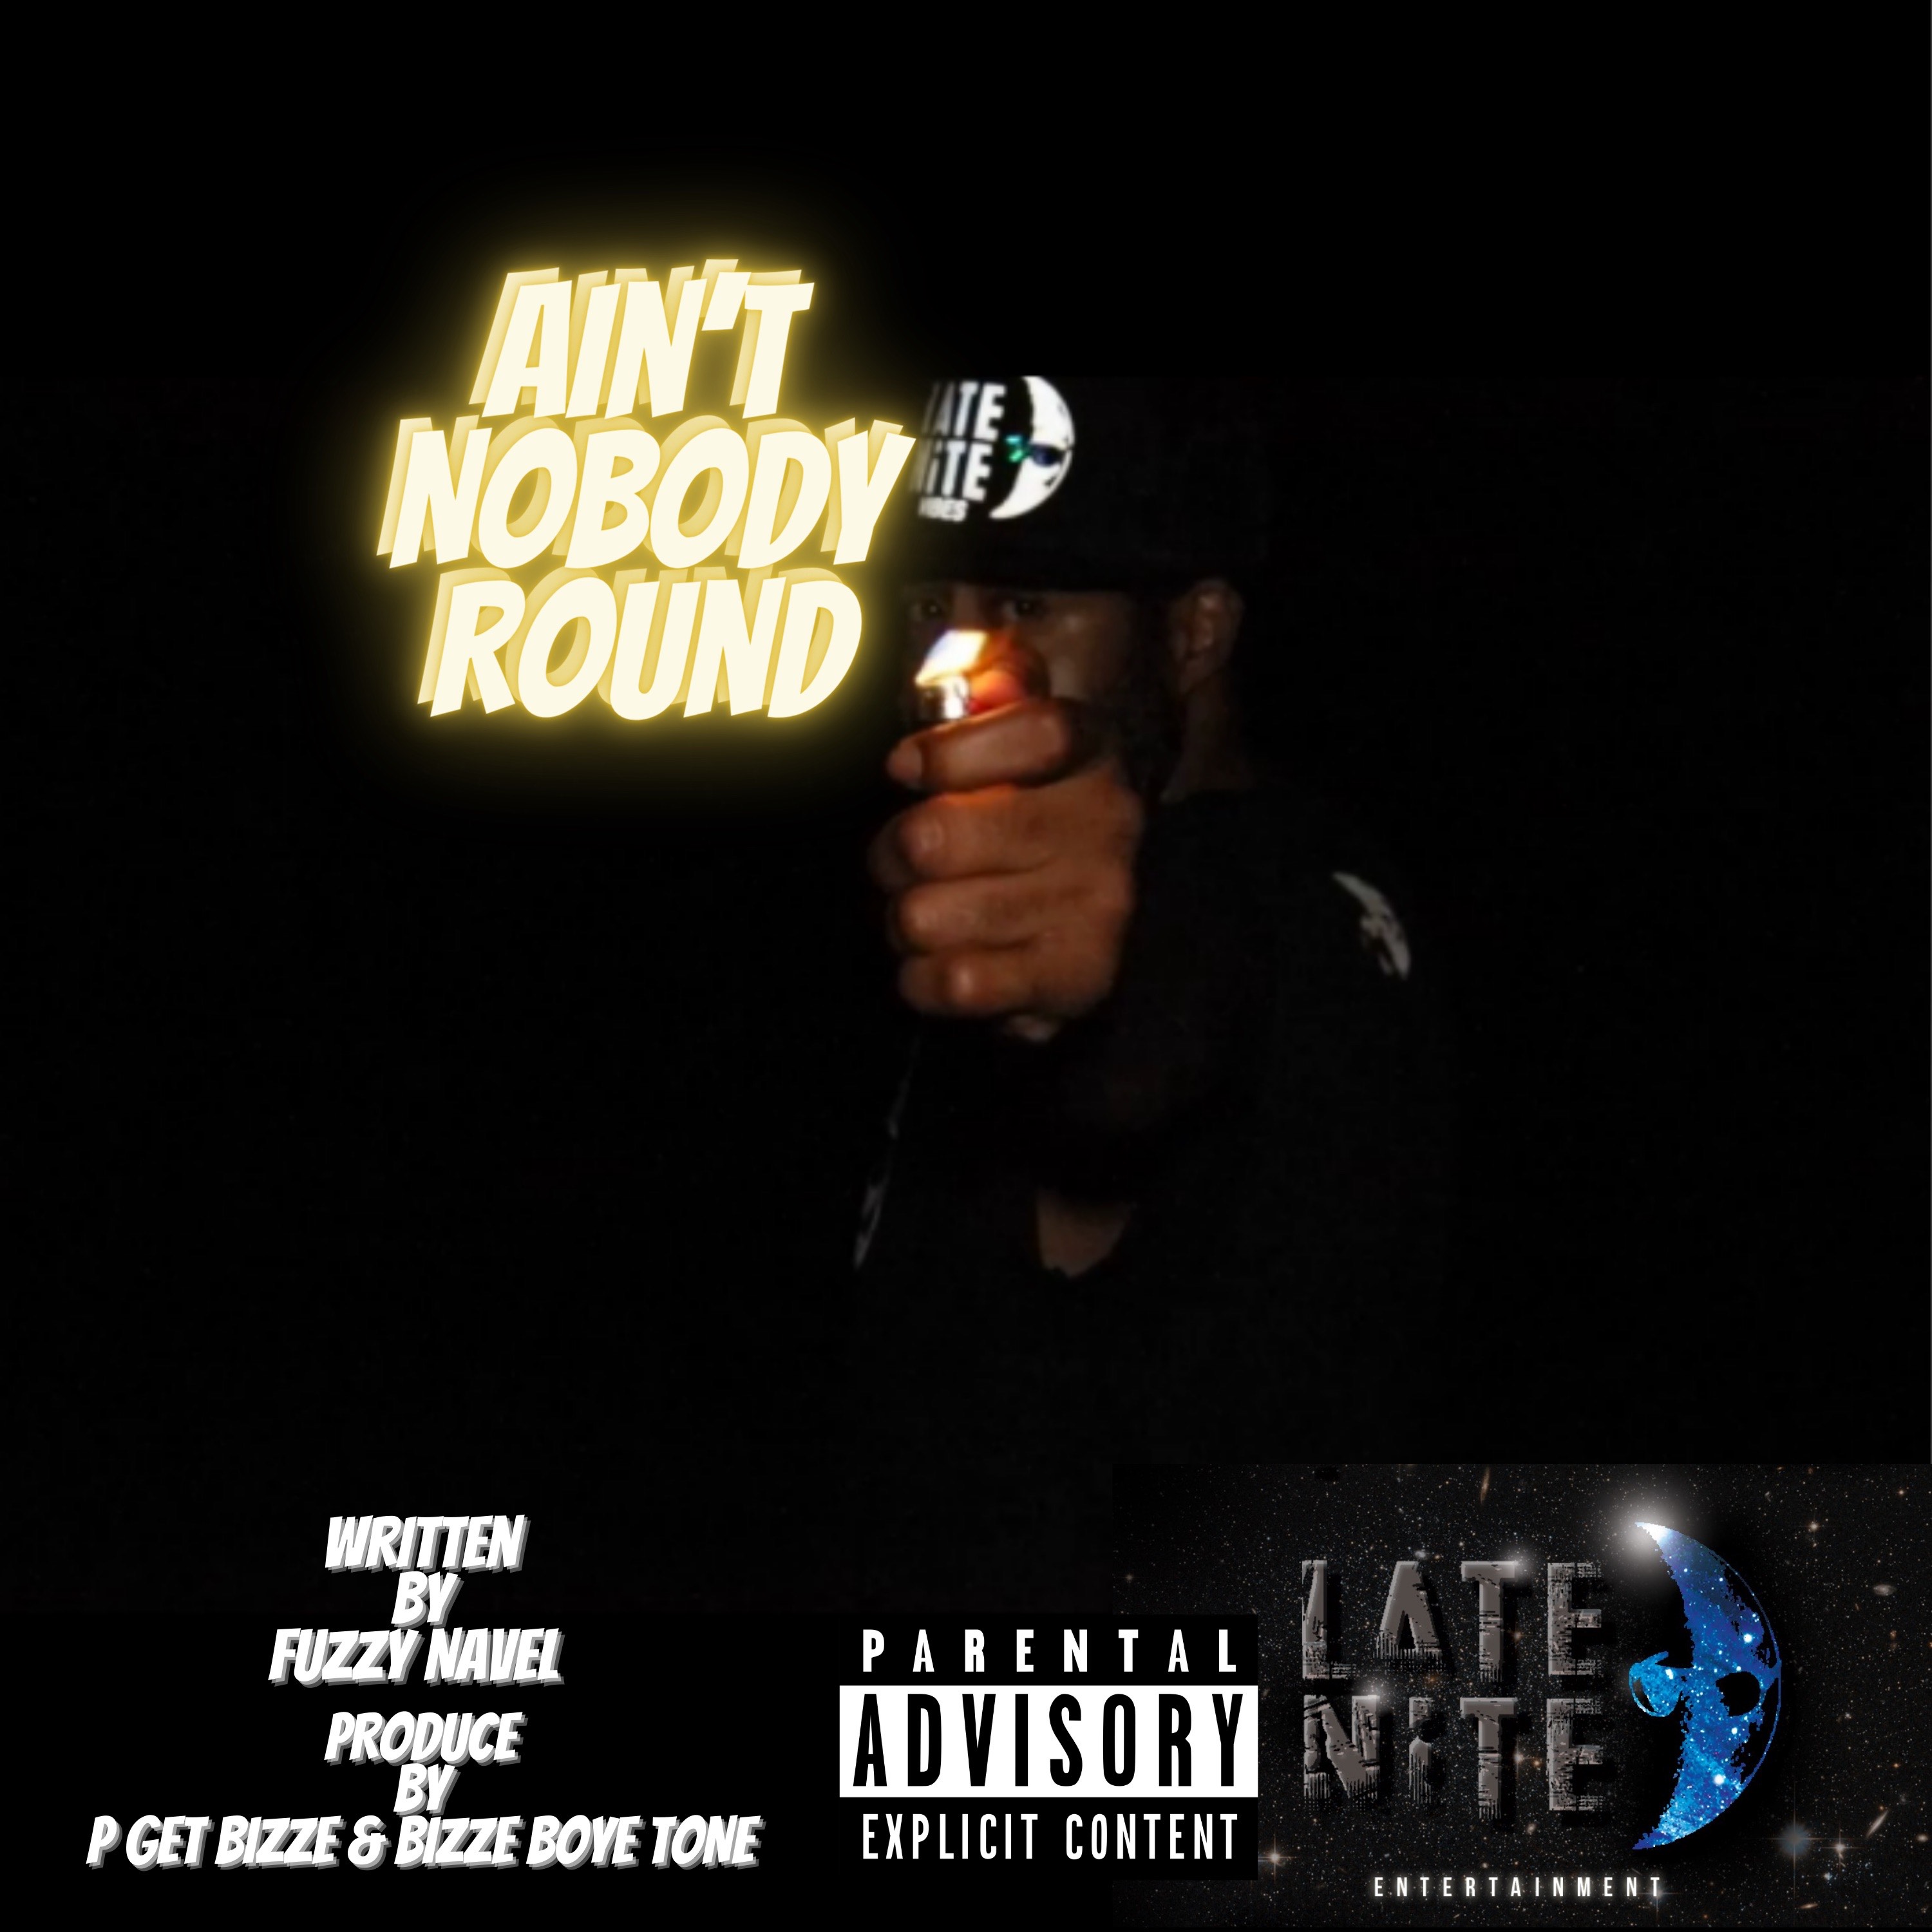 Art for Aint Nobody Round by FUZZY NAVEL